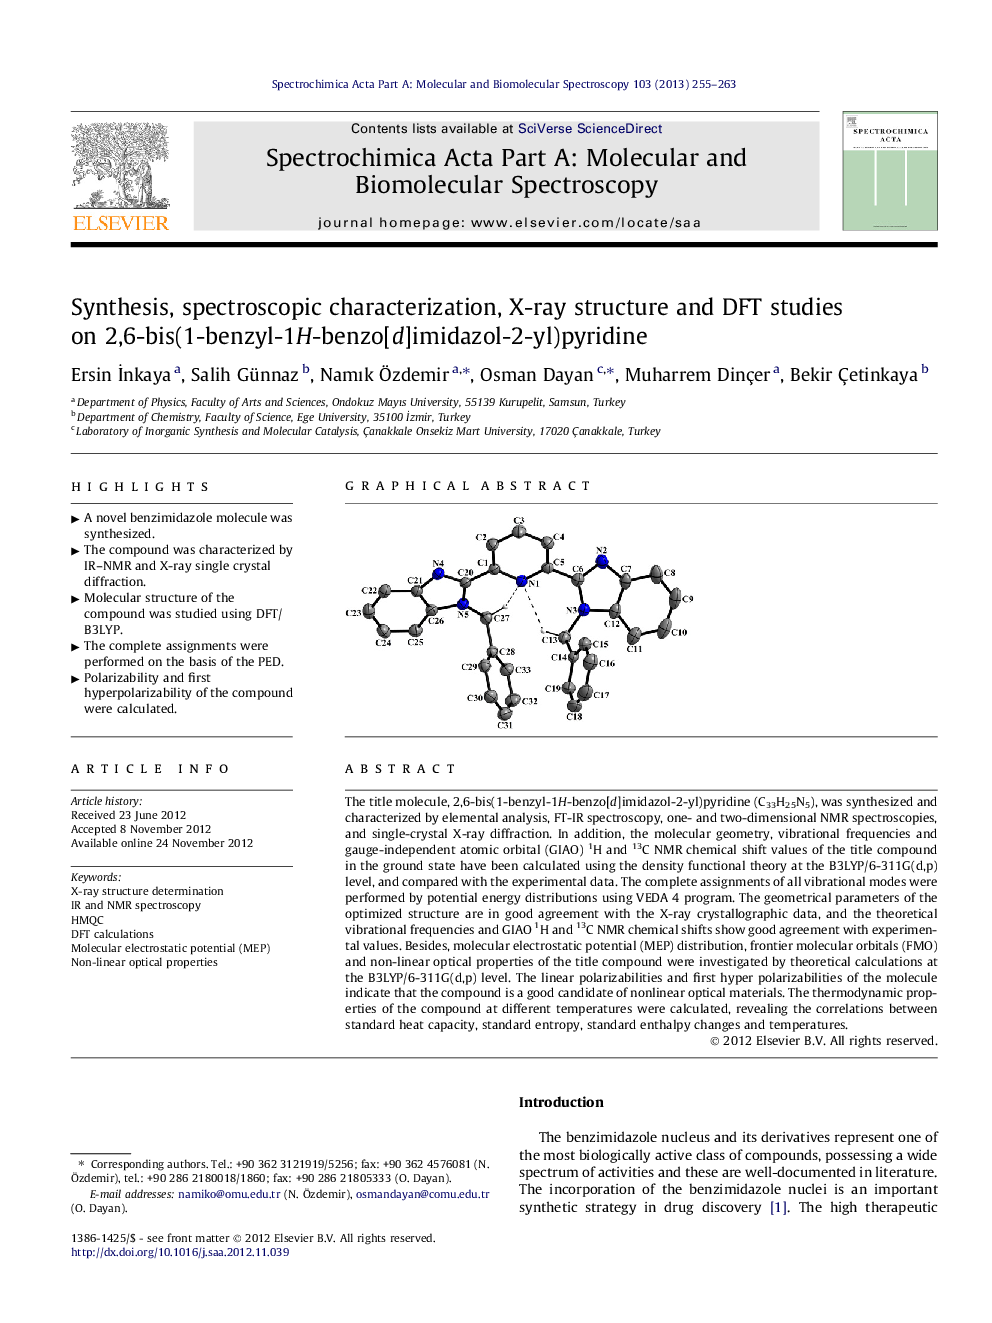 Synthesis, spectroscopic characterization, X-ray structure and DFT studies on 2,6-bis(1-benzyl-1H-benzo[d]imidazol-2-yl)pyridine